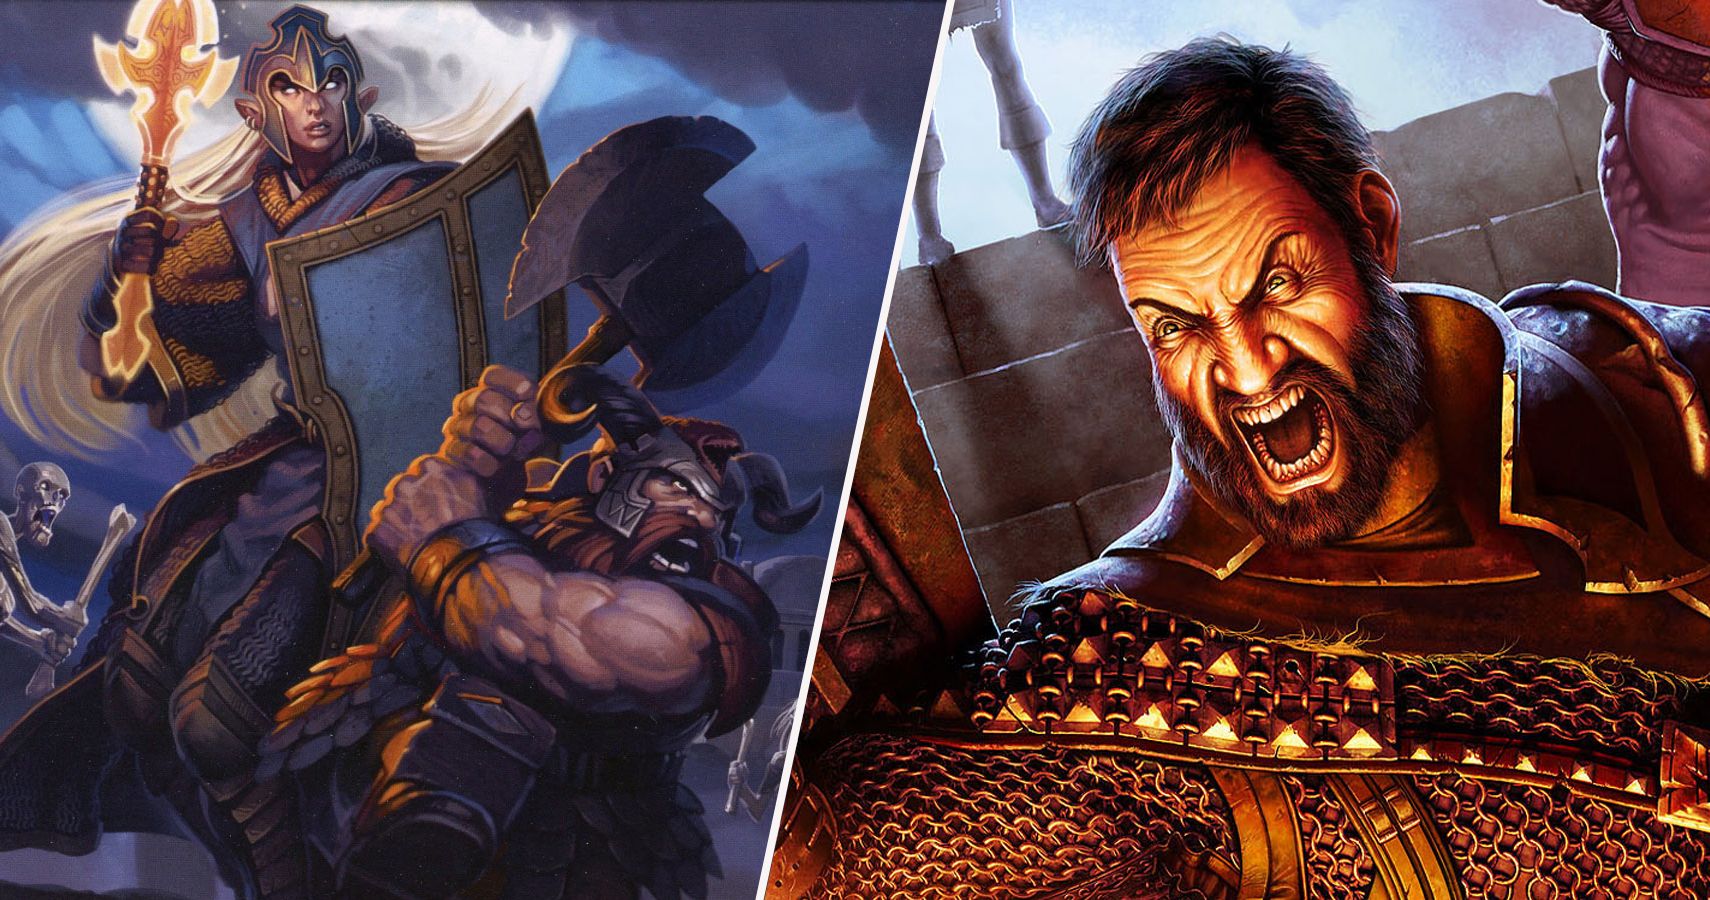 25 Epic Ways To Break Dungeons Dragons Without Cheating